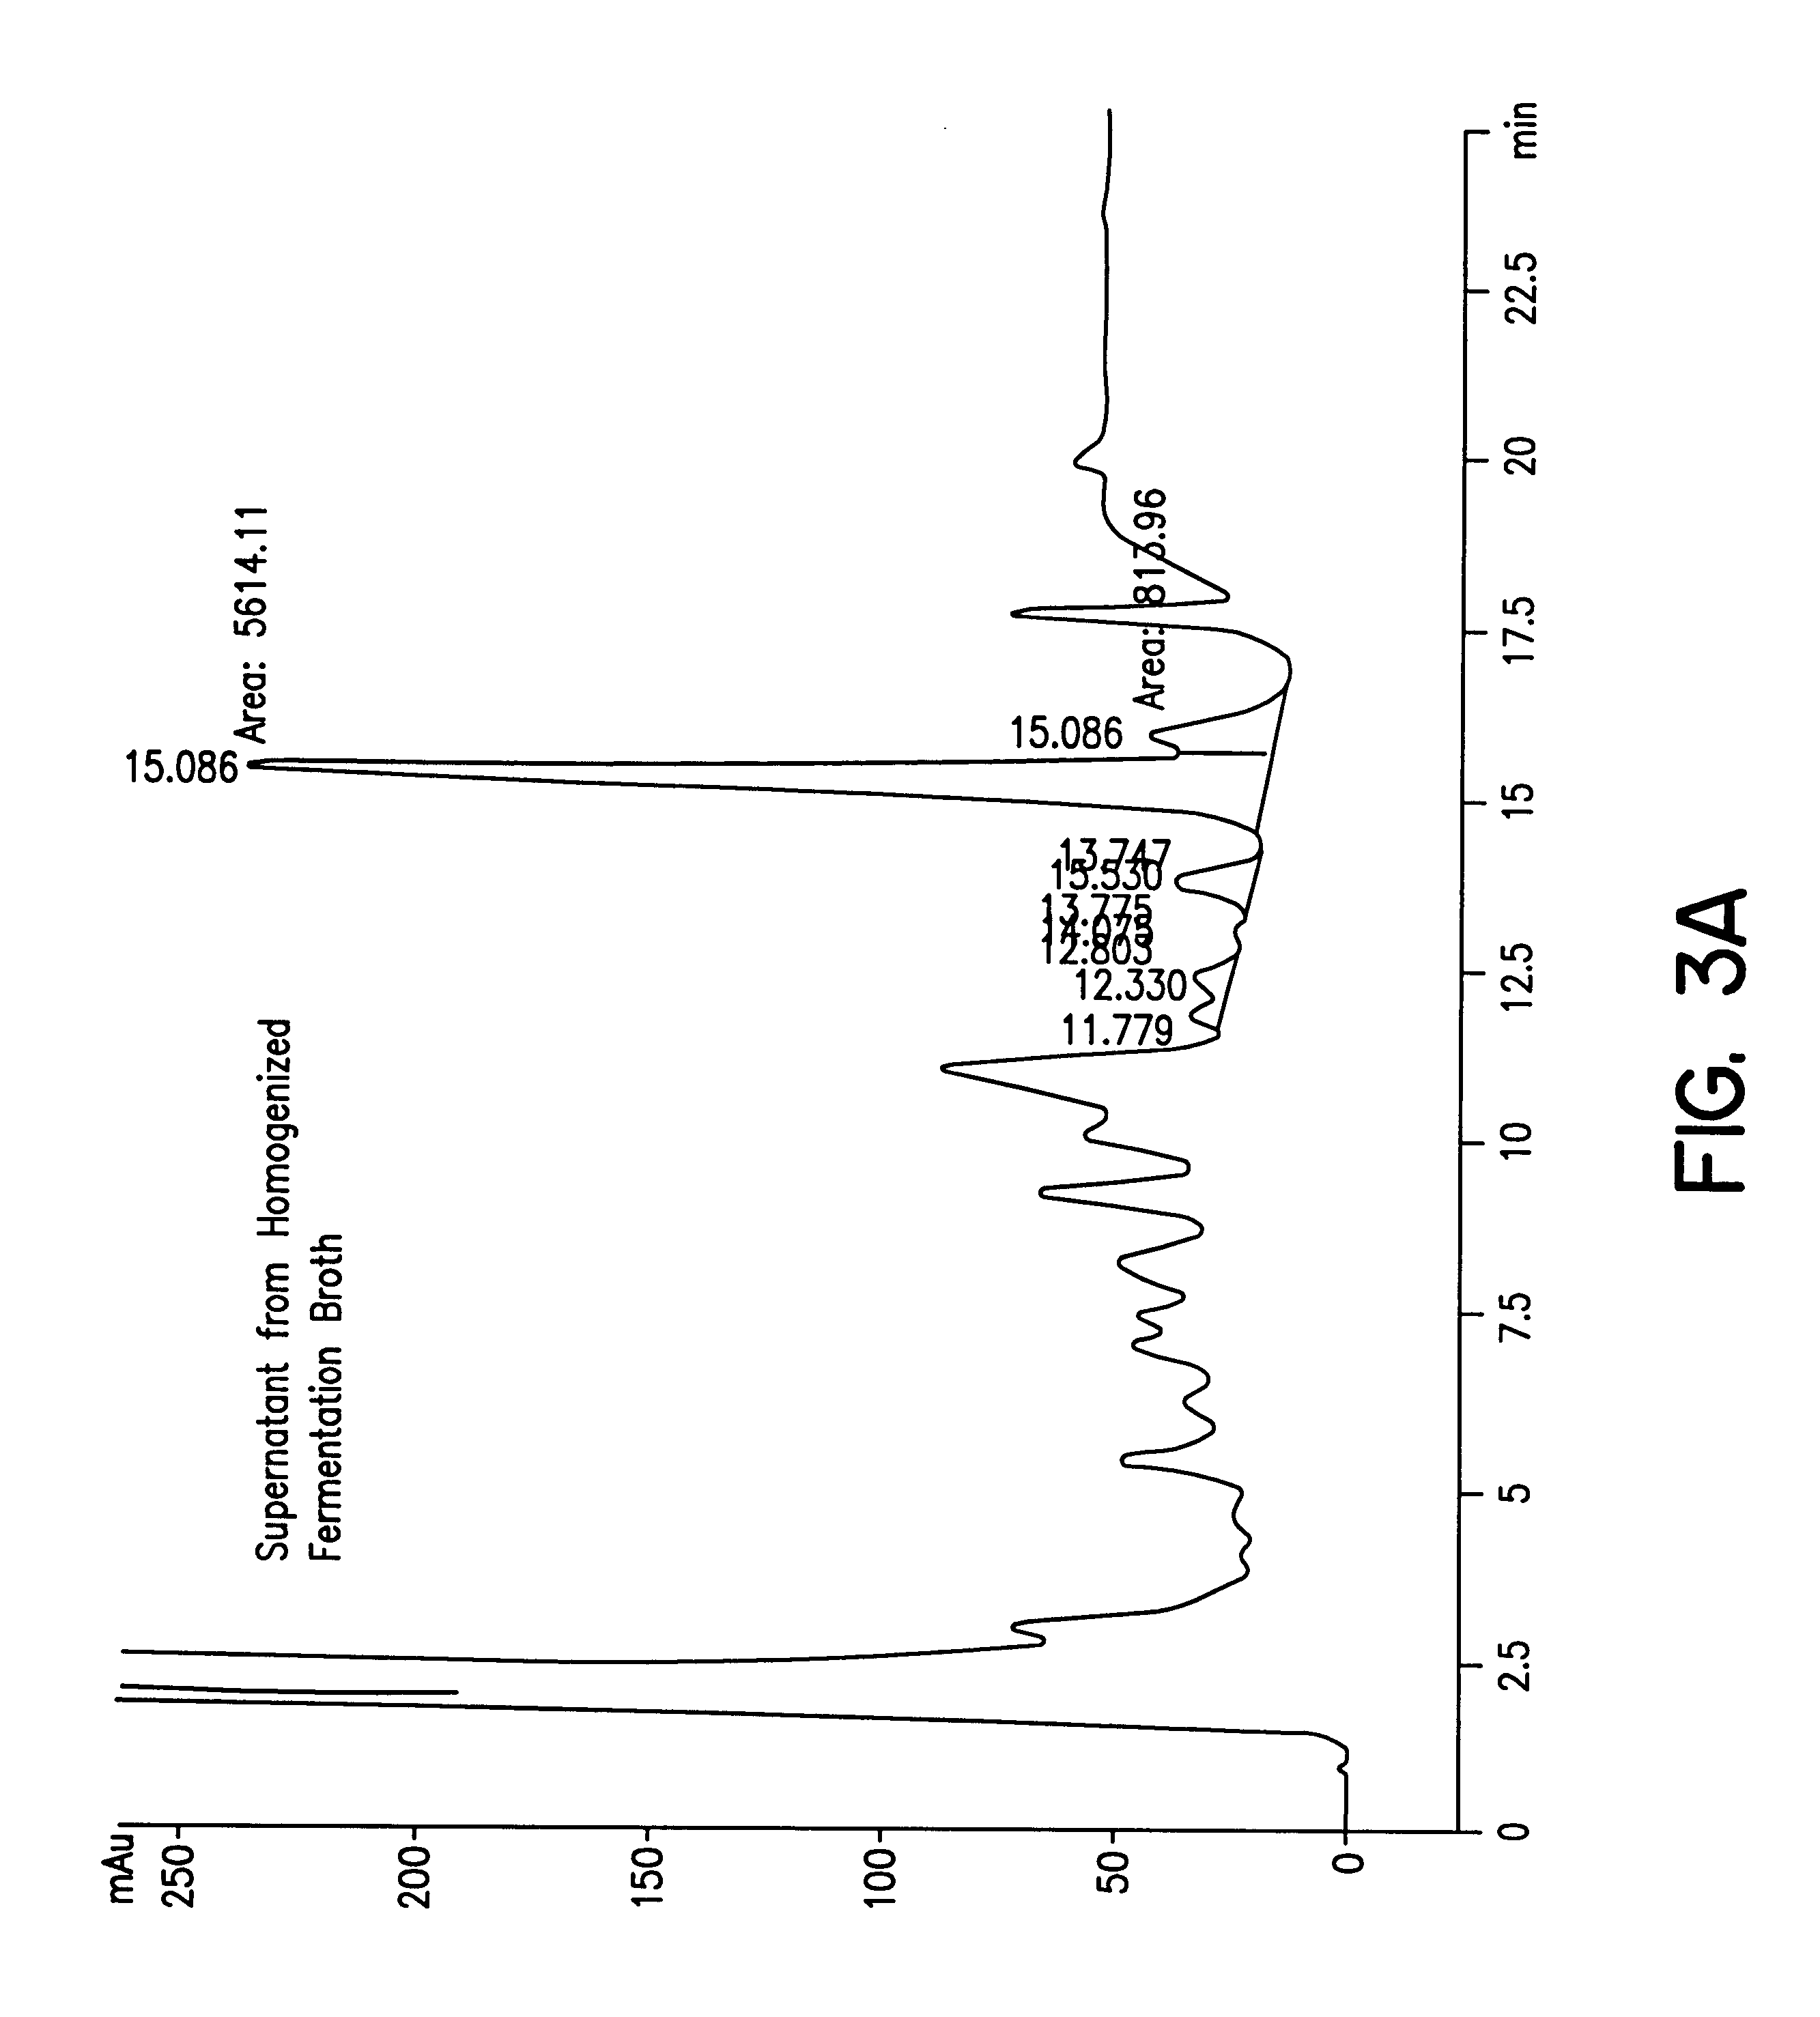 Methods for protein purification using aqueous two-phase extraction